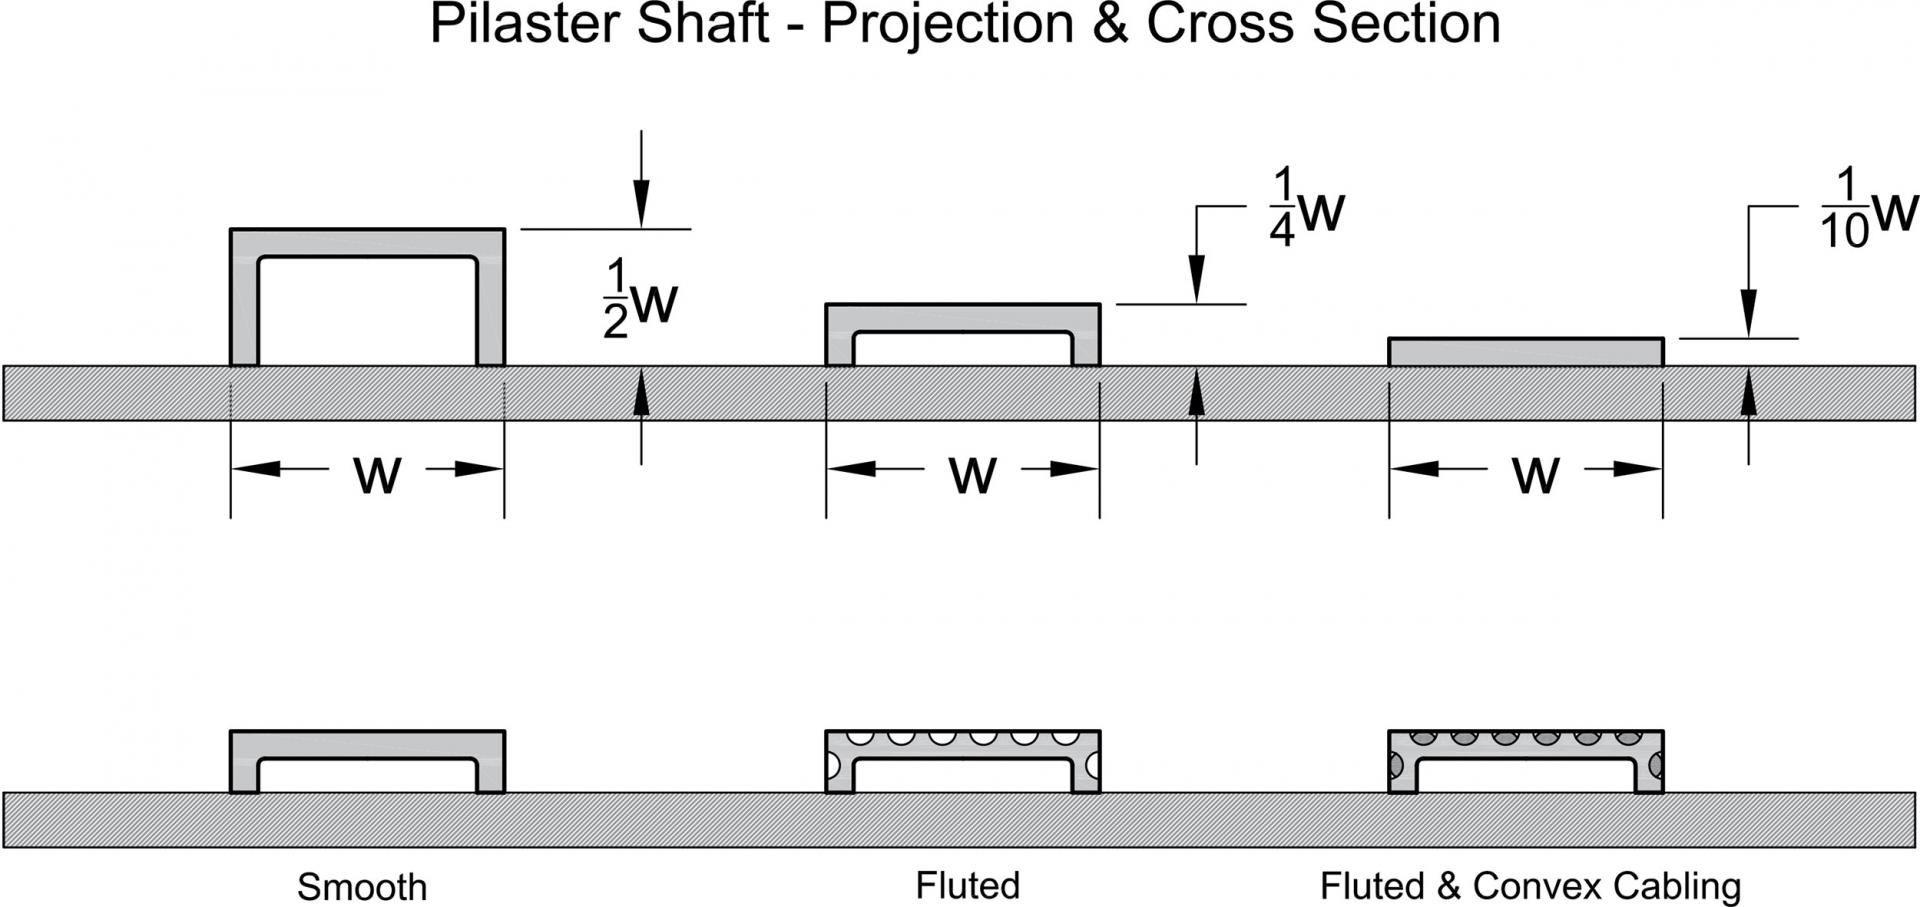 Pliaster Shaft - Projection & Cross Section